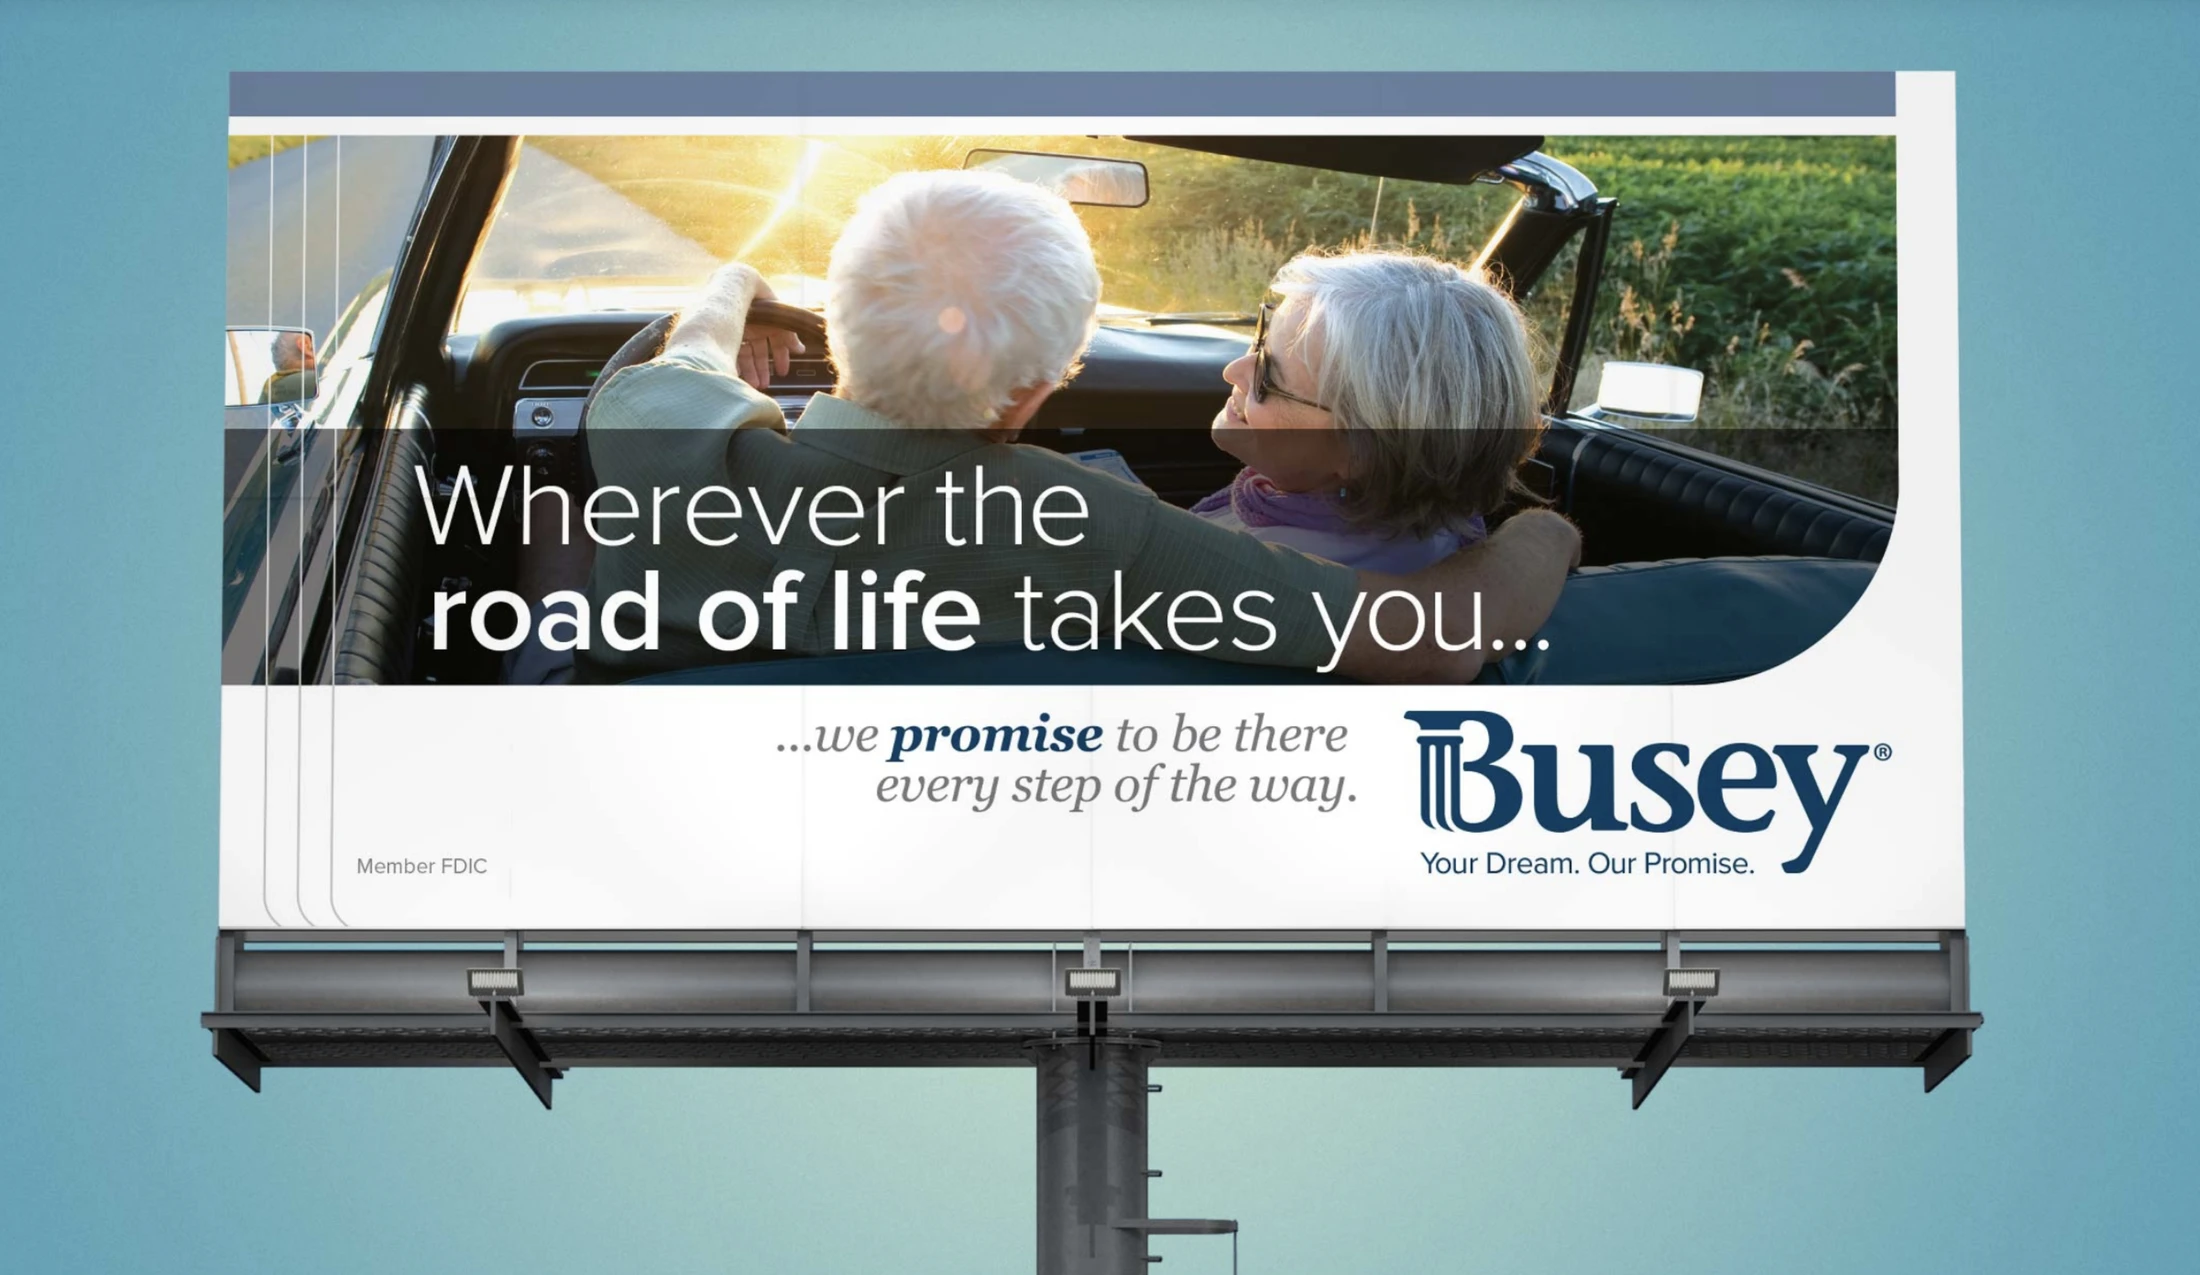 Bussey billboard - wherever the road of life takes you.